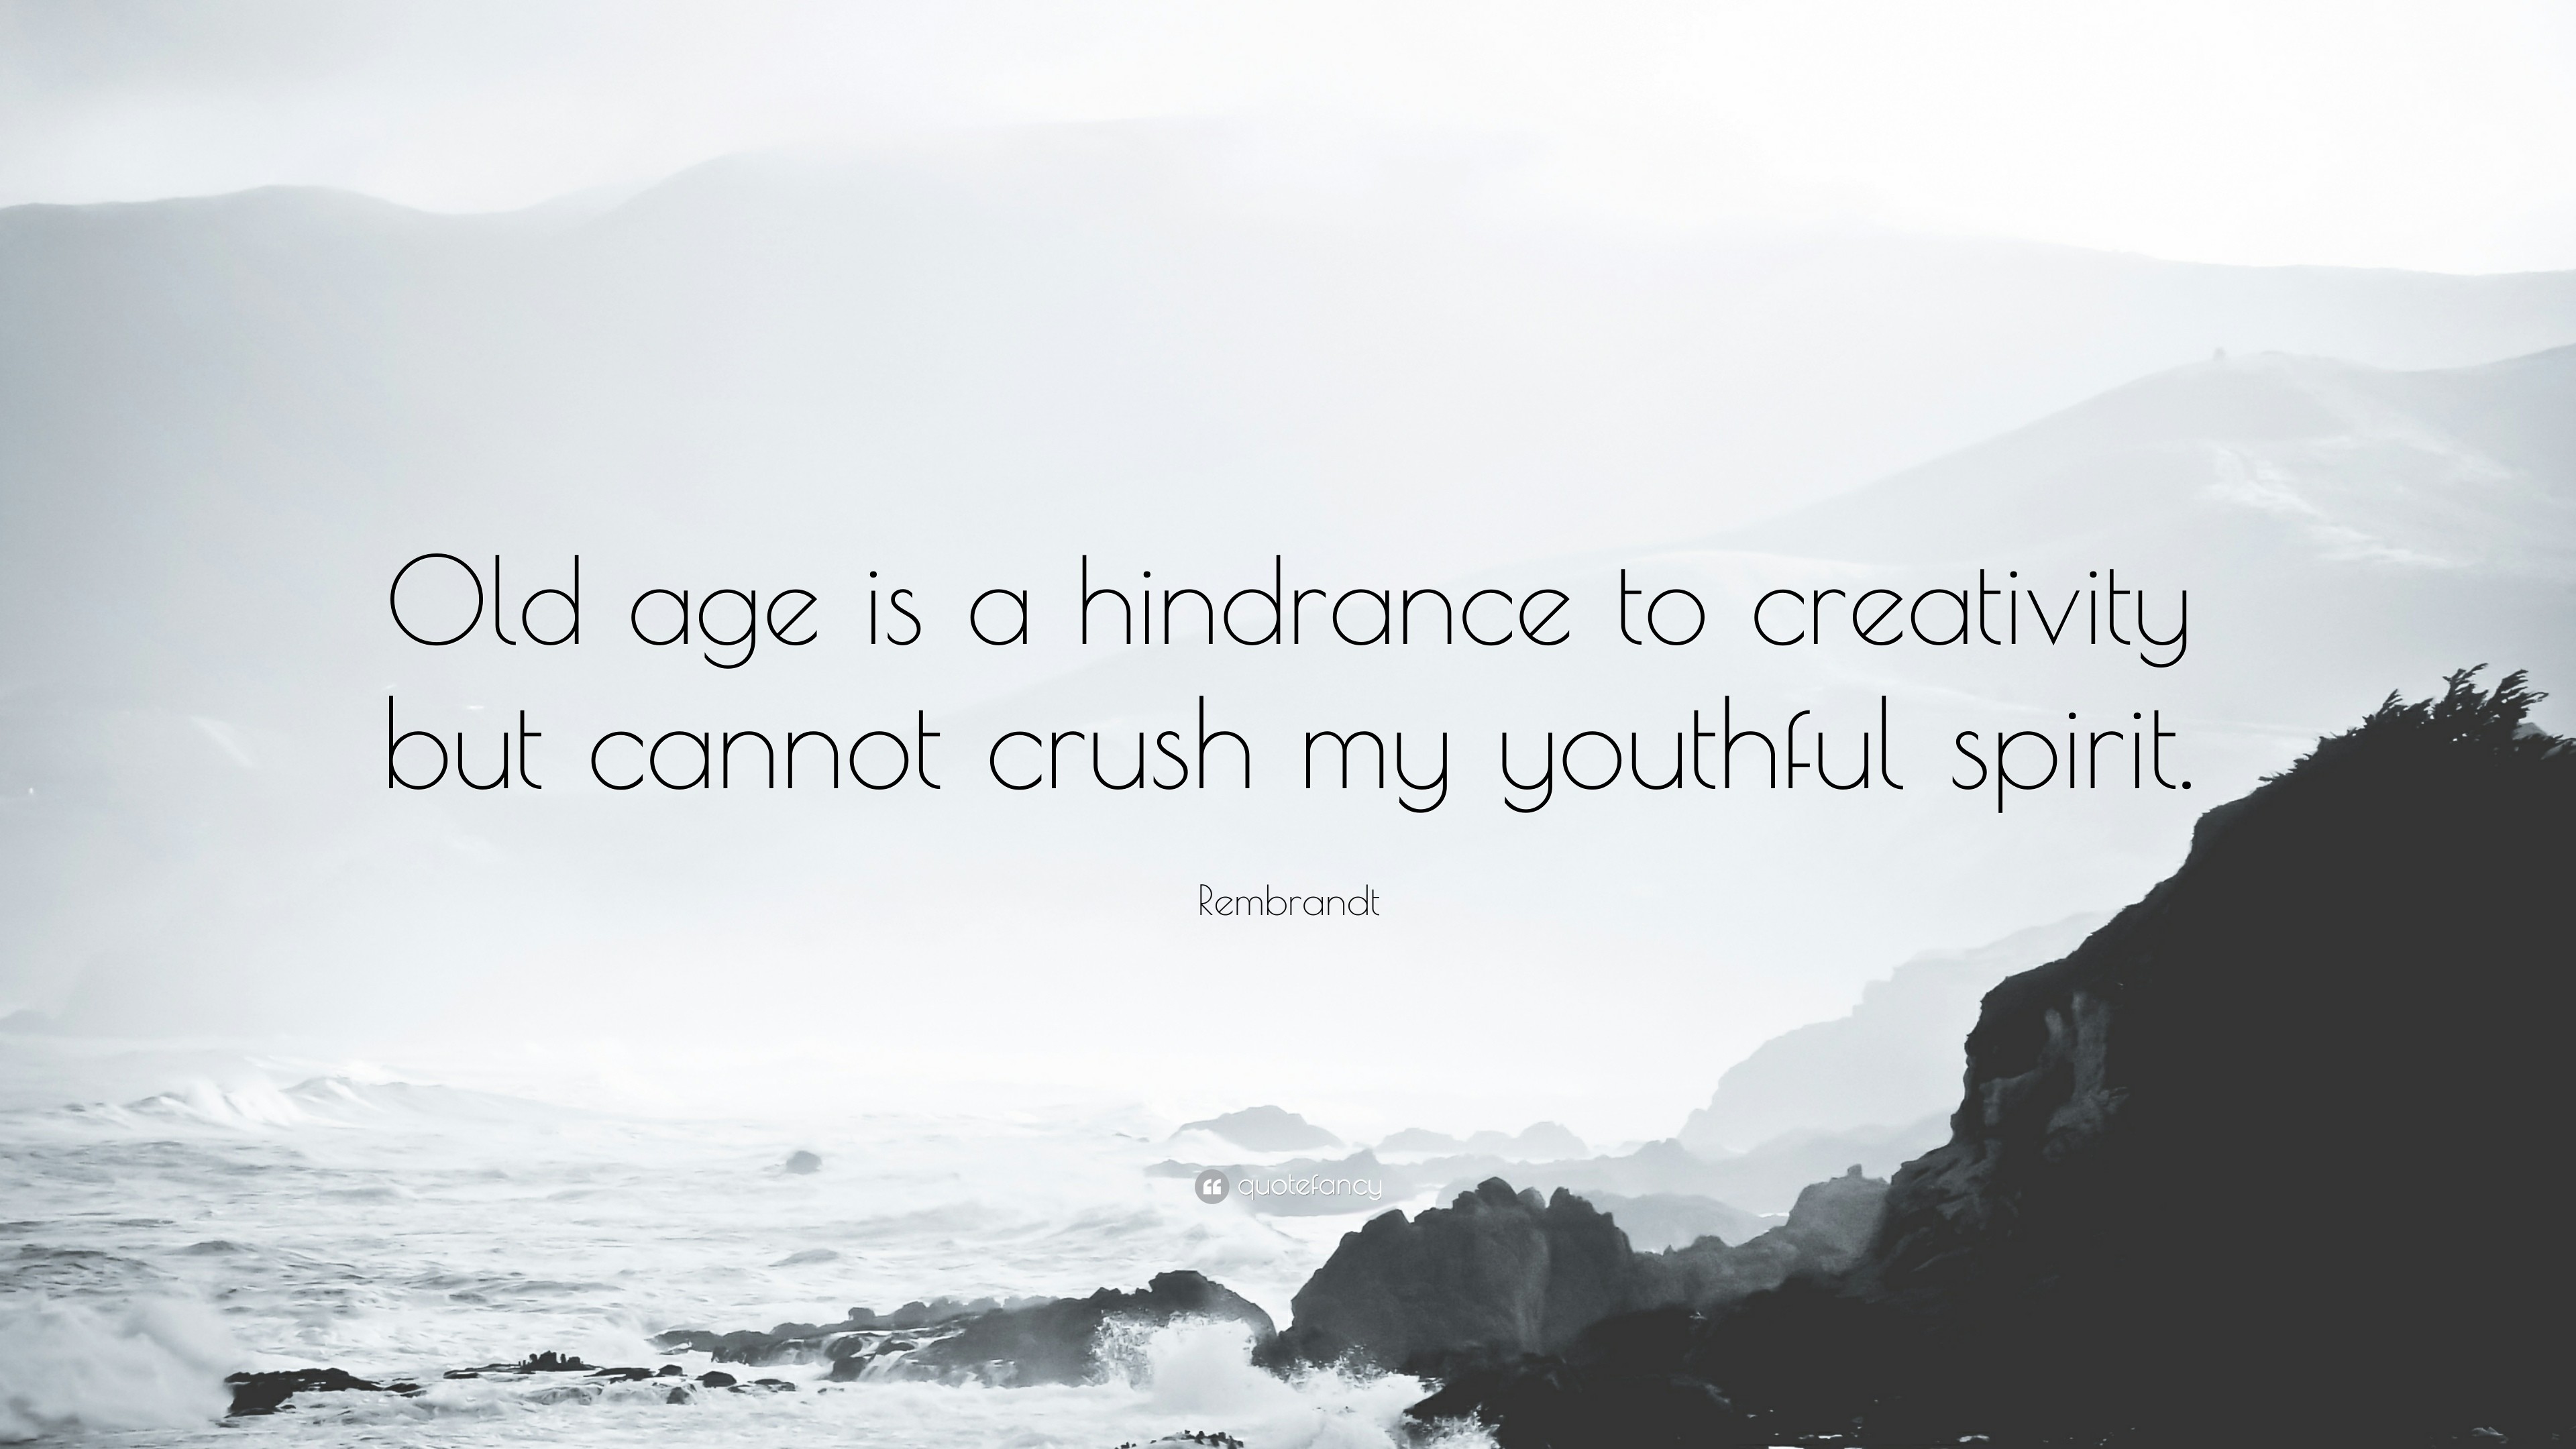 3840x2160 Rembrandt Quote: “Old age is a hindrance to creativity but cannot crush my  youthful